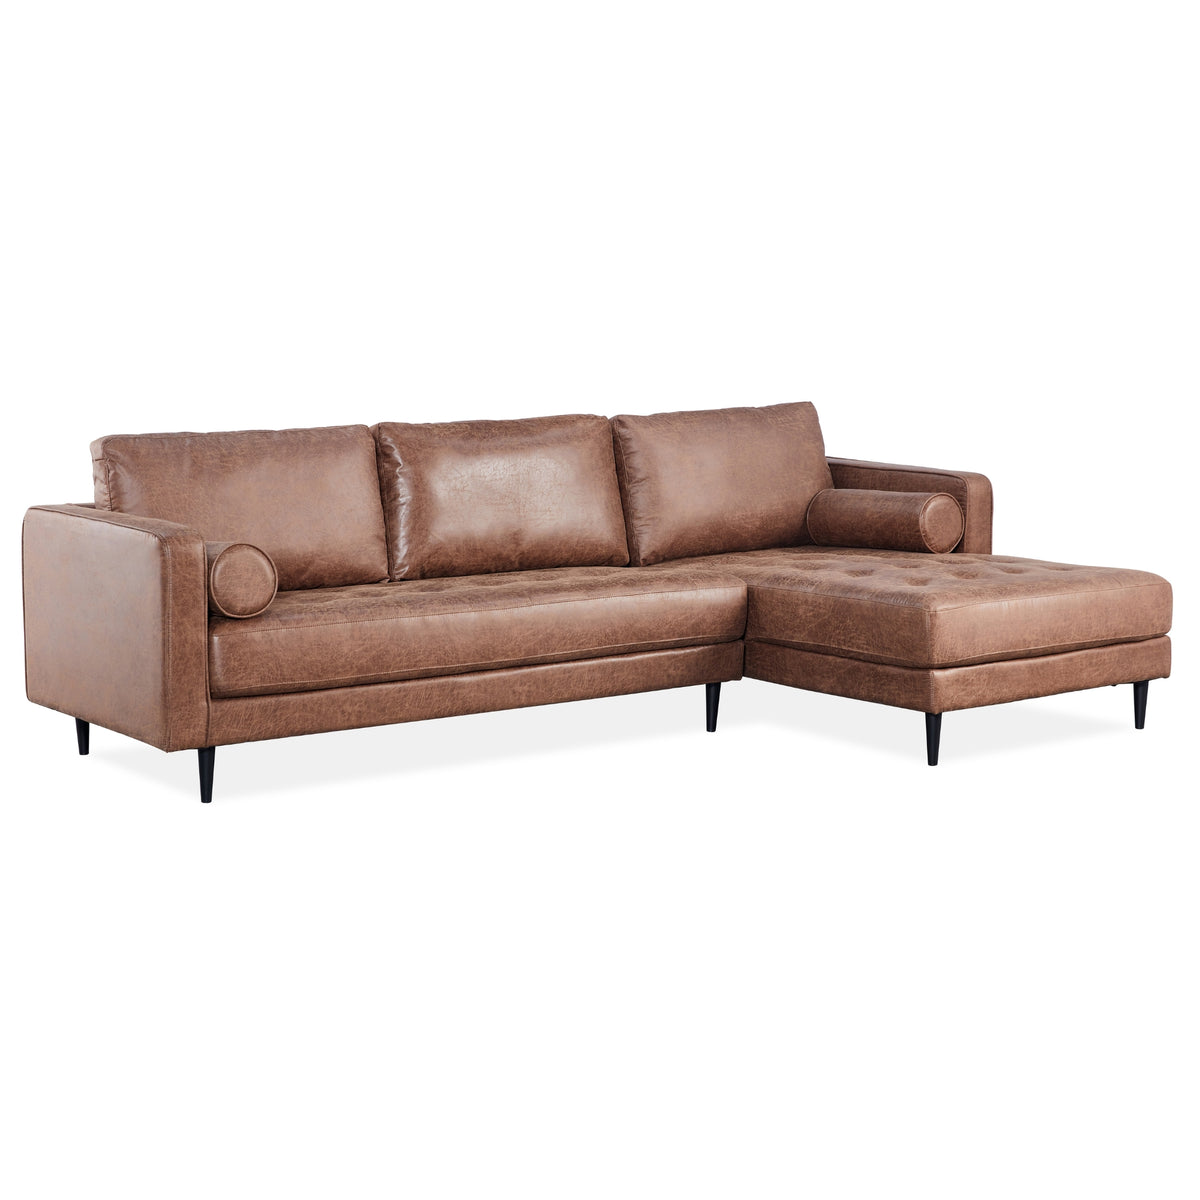 Chelsea 2 Seater Fabric Chaise Sofa Dark Brown Right